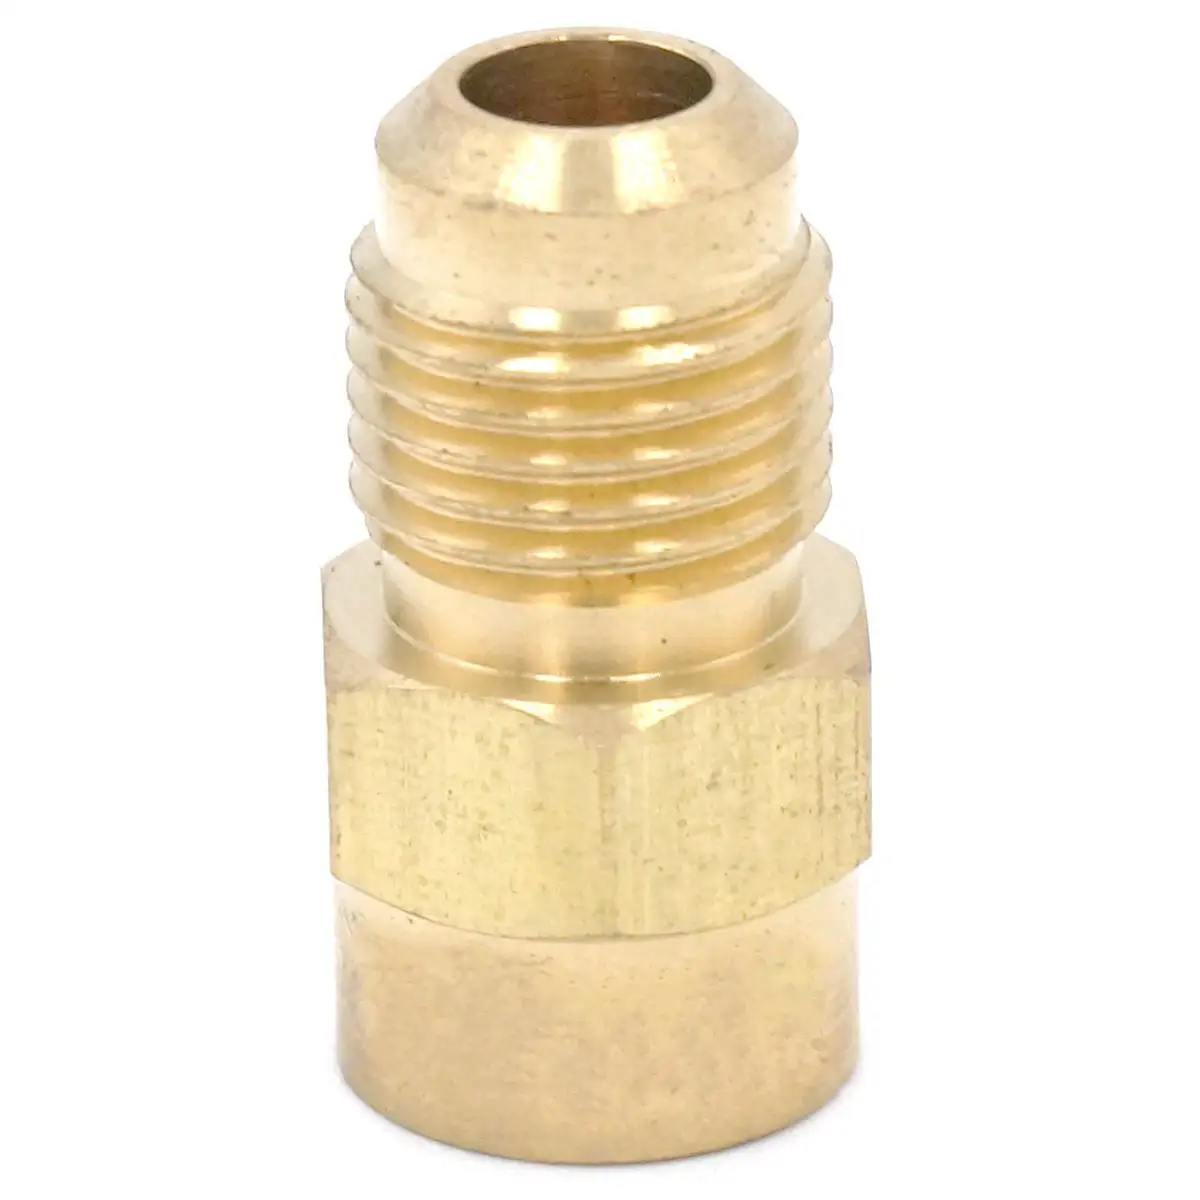 

SAE Thread 1/2"-20 UNF Fit Tube OD 5/16" x 1/8" NPT Female Brass SAE 45 Degree Pipe Fitting Adapter